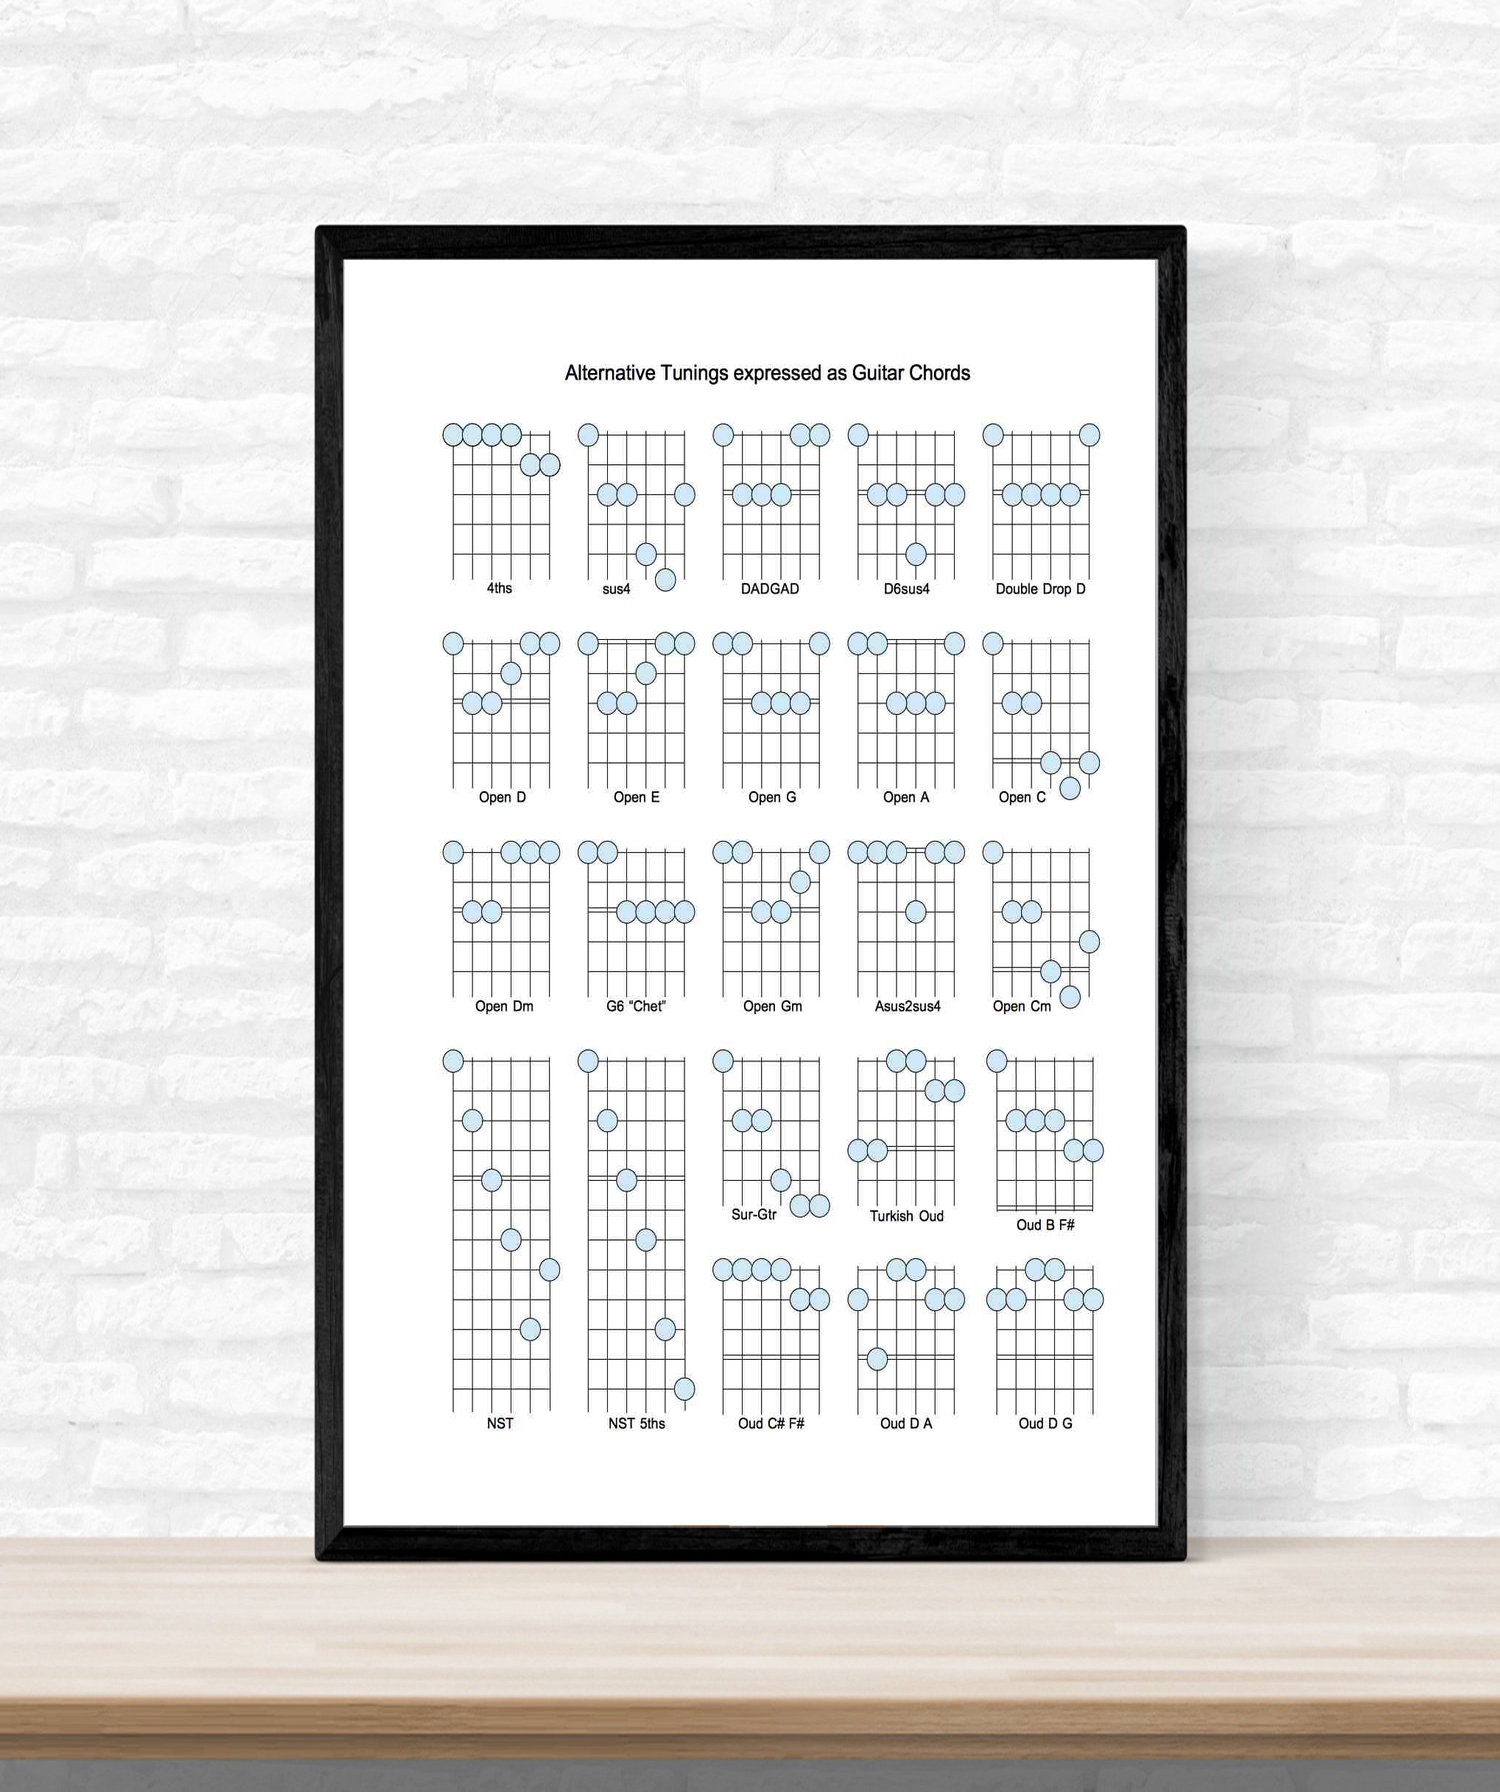 Guitar Chords Chart Us 69 Guitar Chord Chart Cotton Silk Art Print Poster Home Decor Picture No Frame 12x18 24x36inch In Painting Calligraphy From Home Garden On